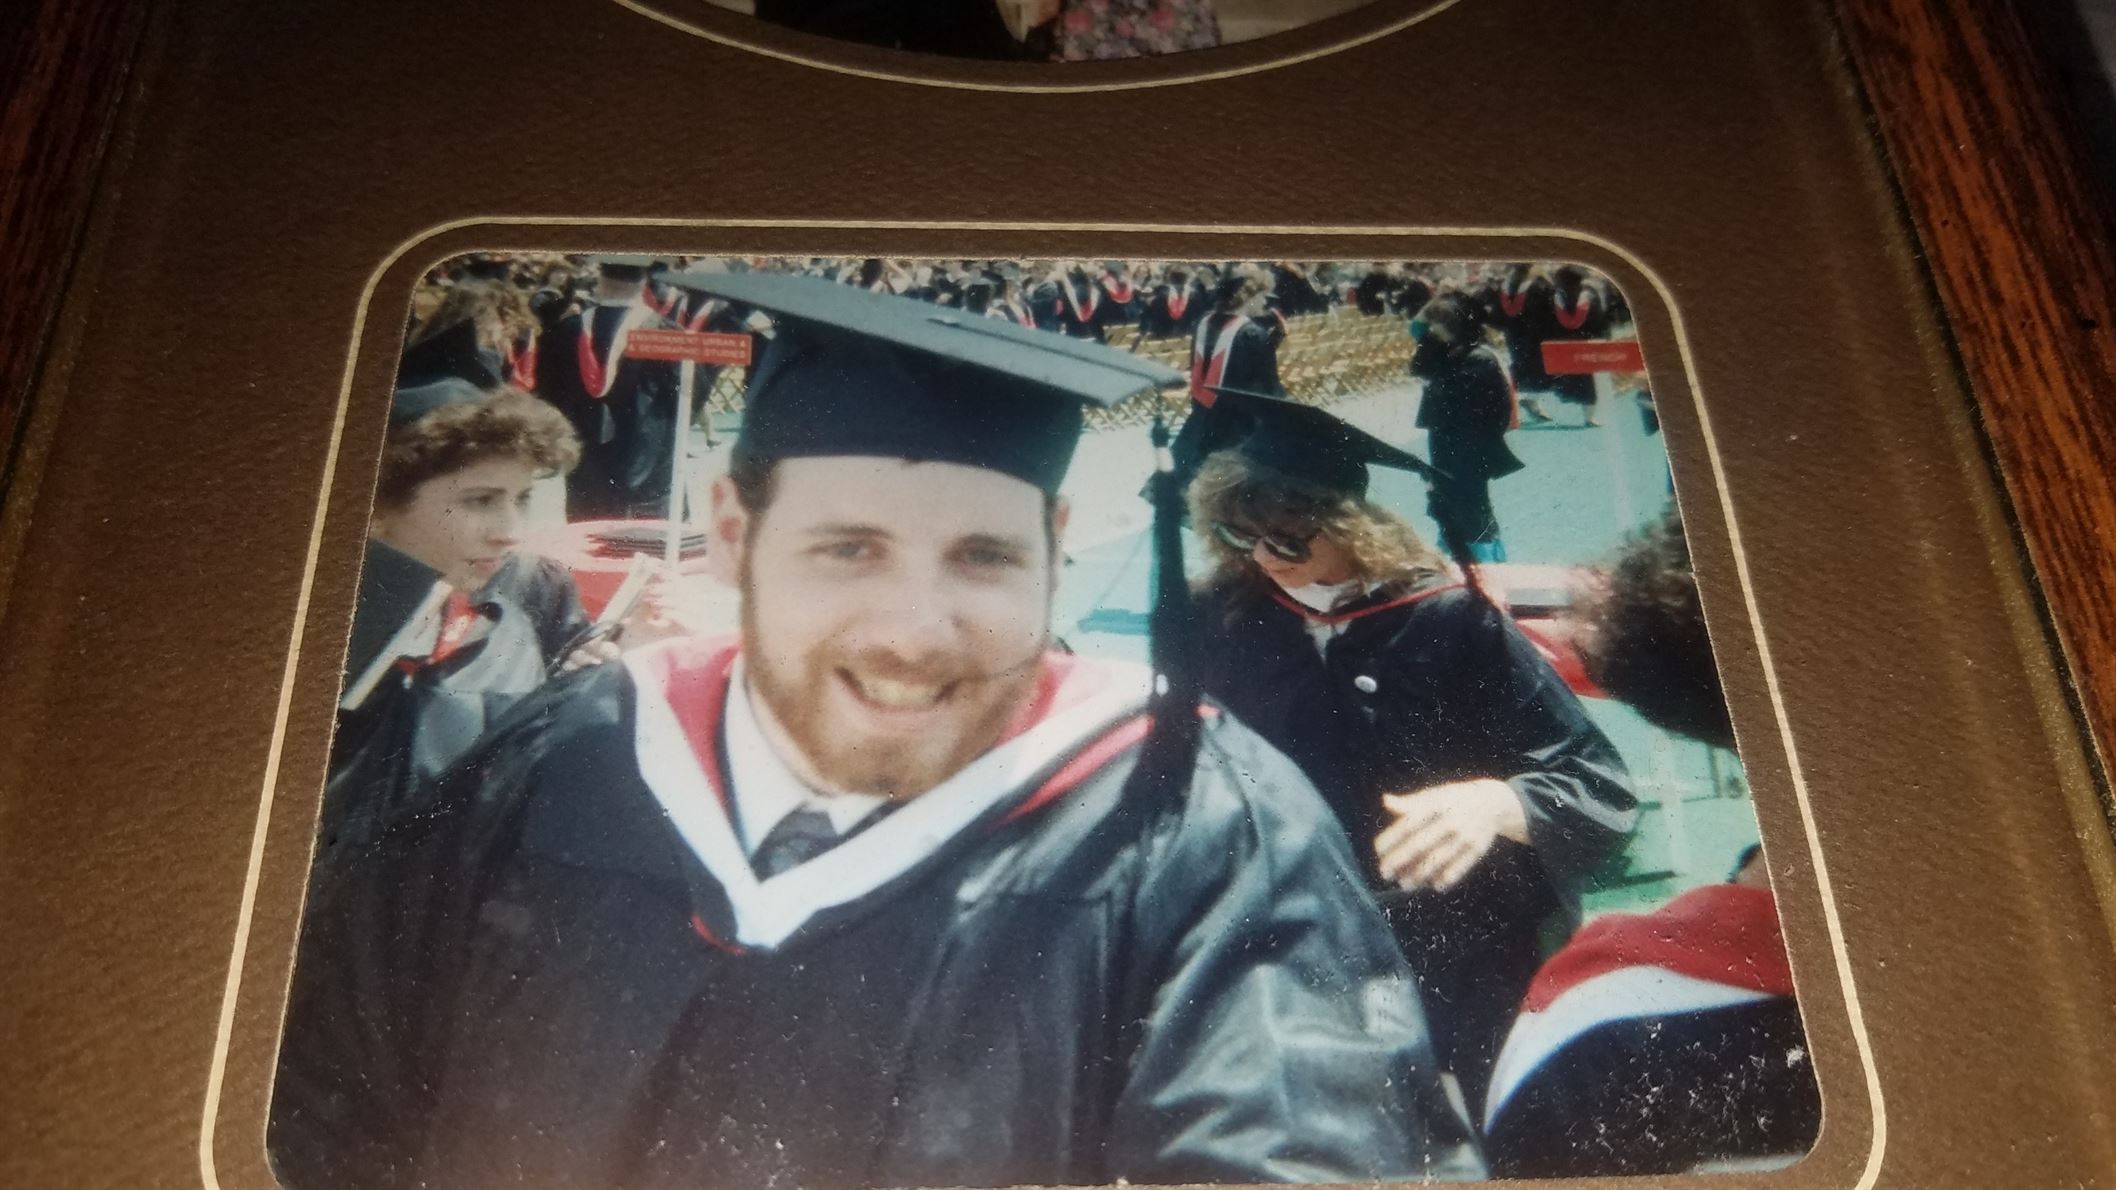 A frequent caller of the success hotline and Montclair State alumna Thomas Boud at his 1988 graduation ceremony at the then, Panzer Field. Photo courtesy of Thomas Boud